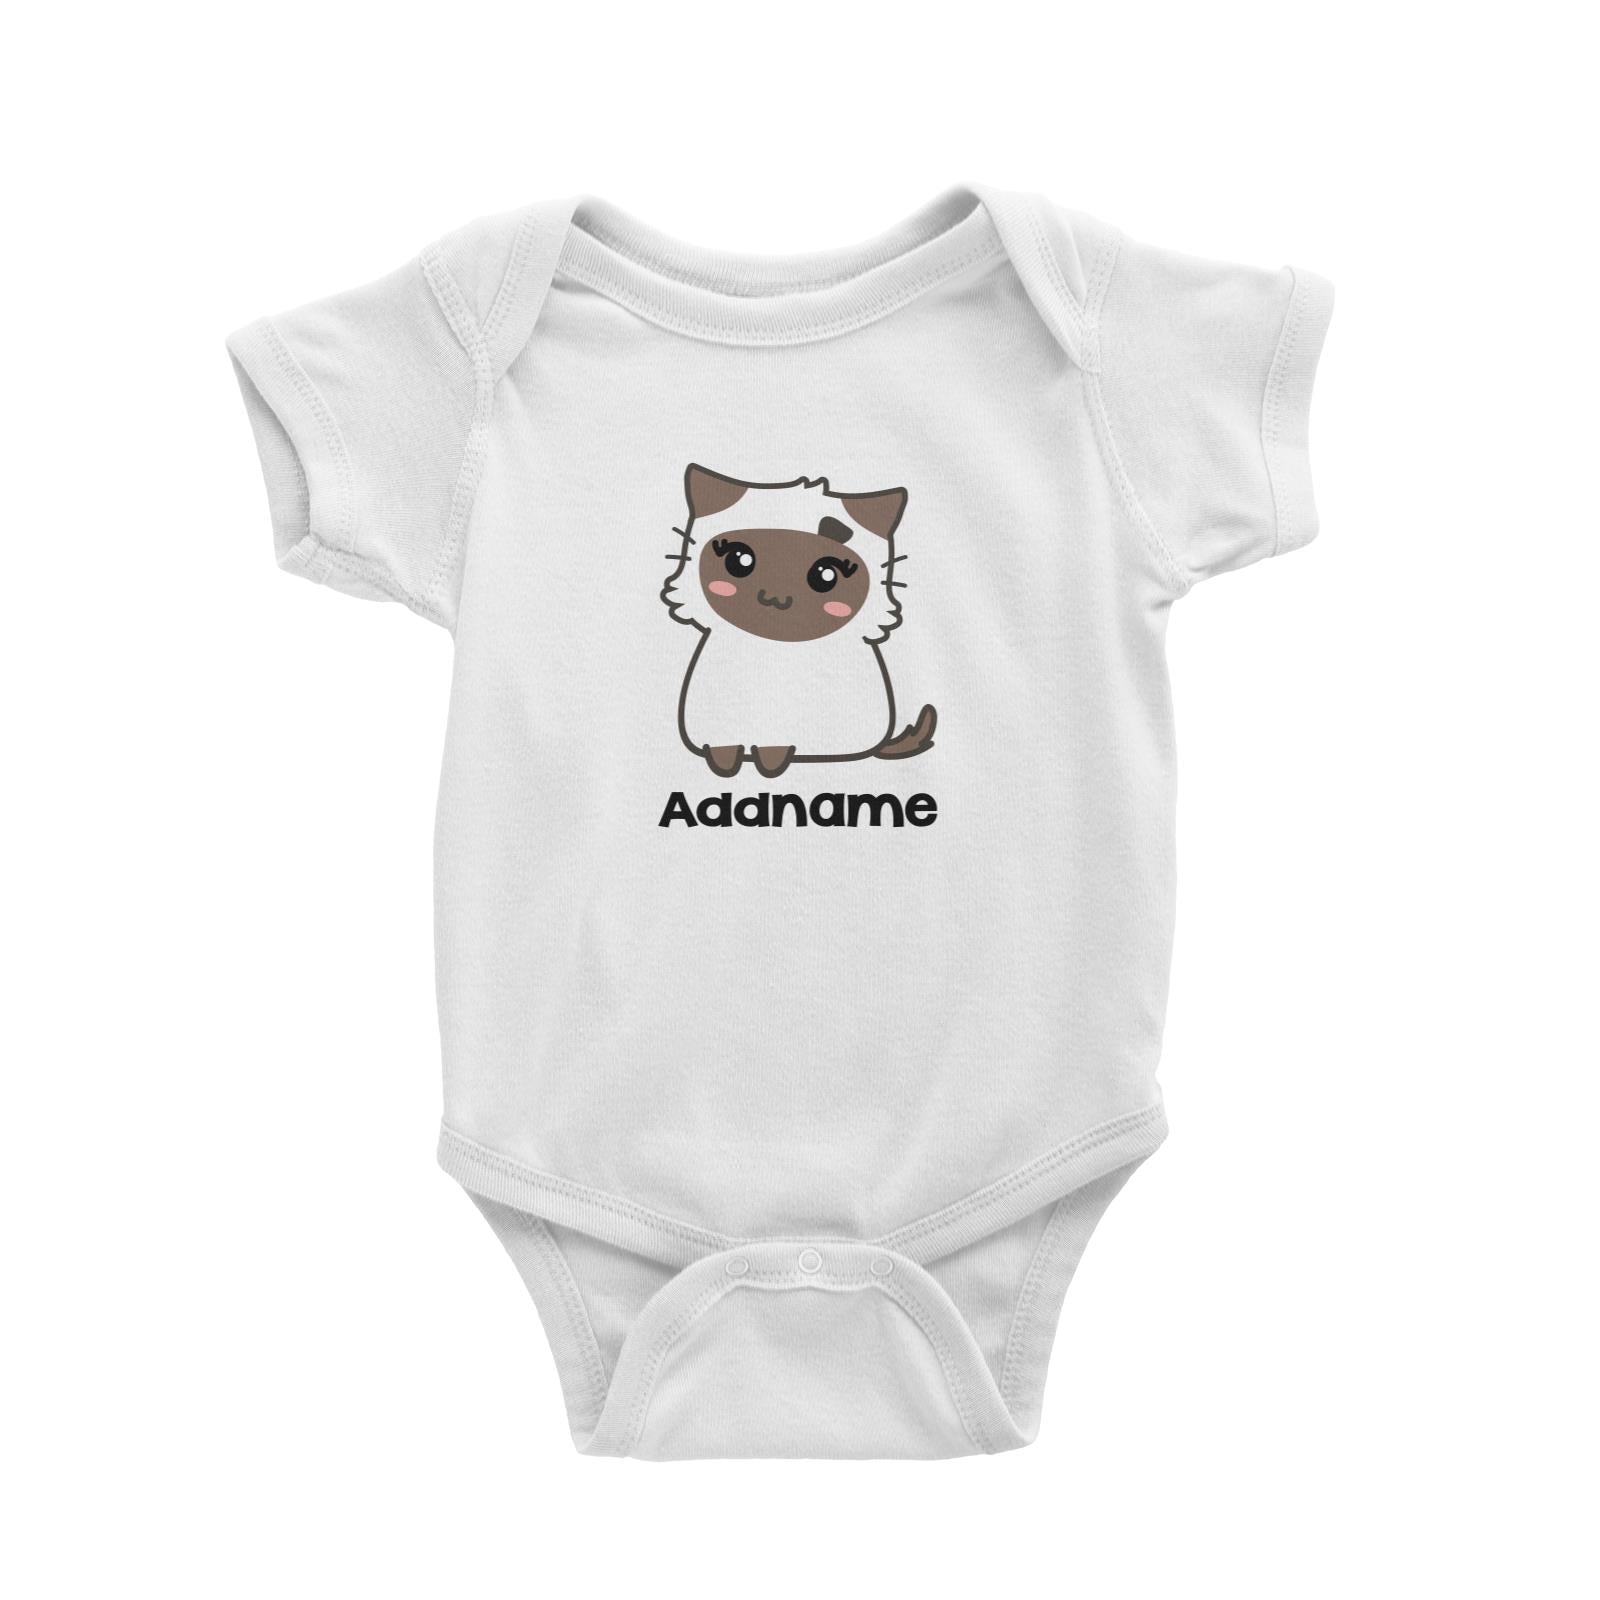 Drawn Adorable Cats White & Chocolate Addname Baby Romper